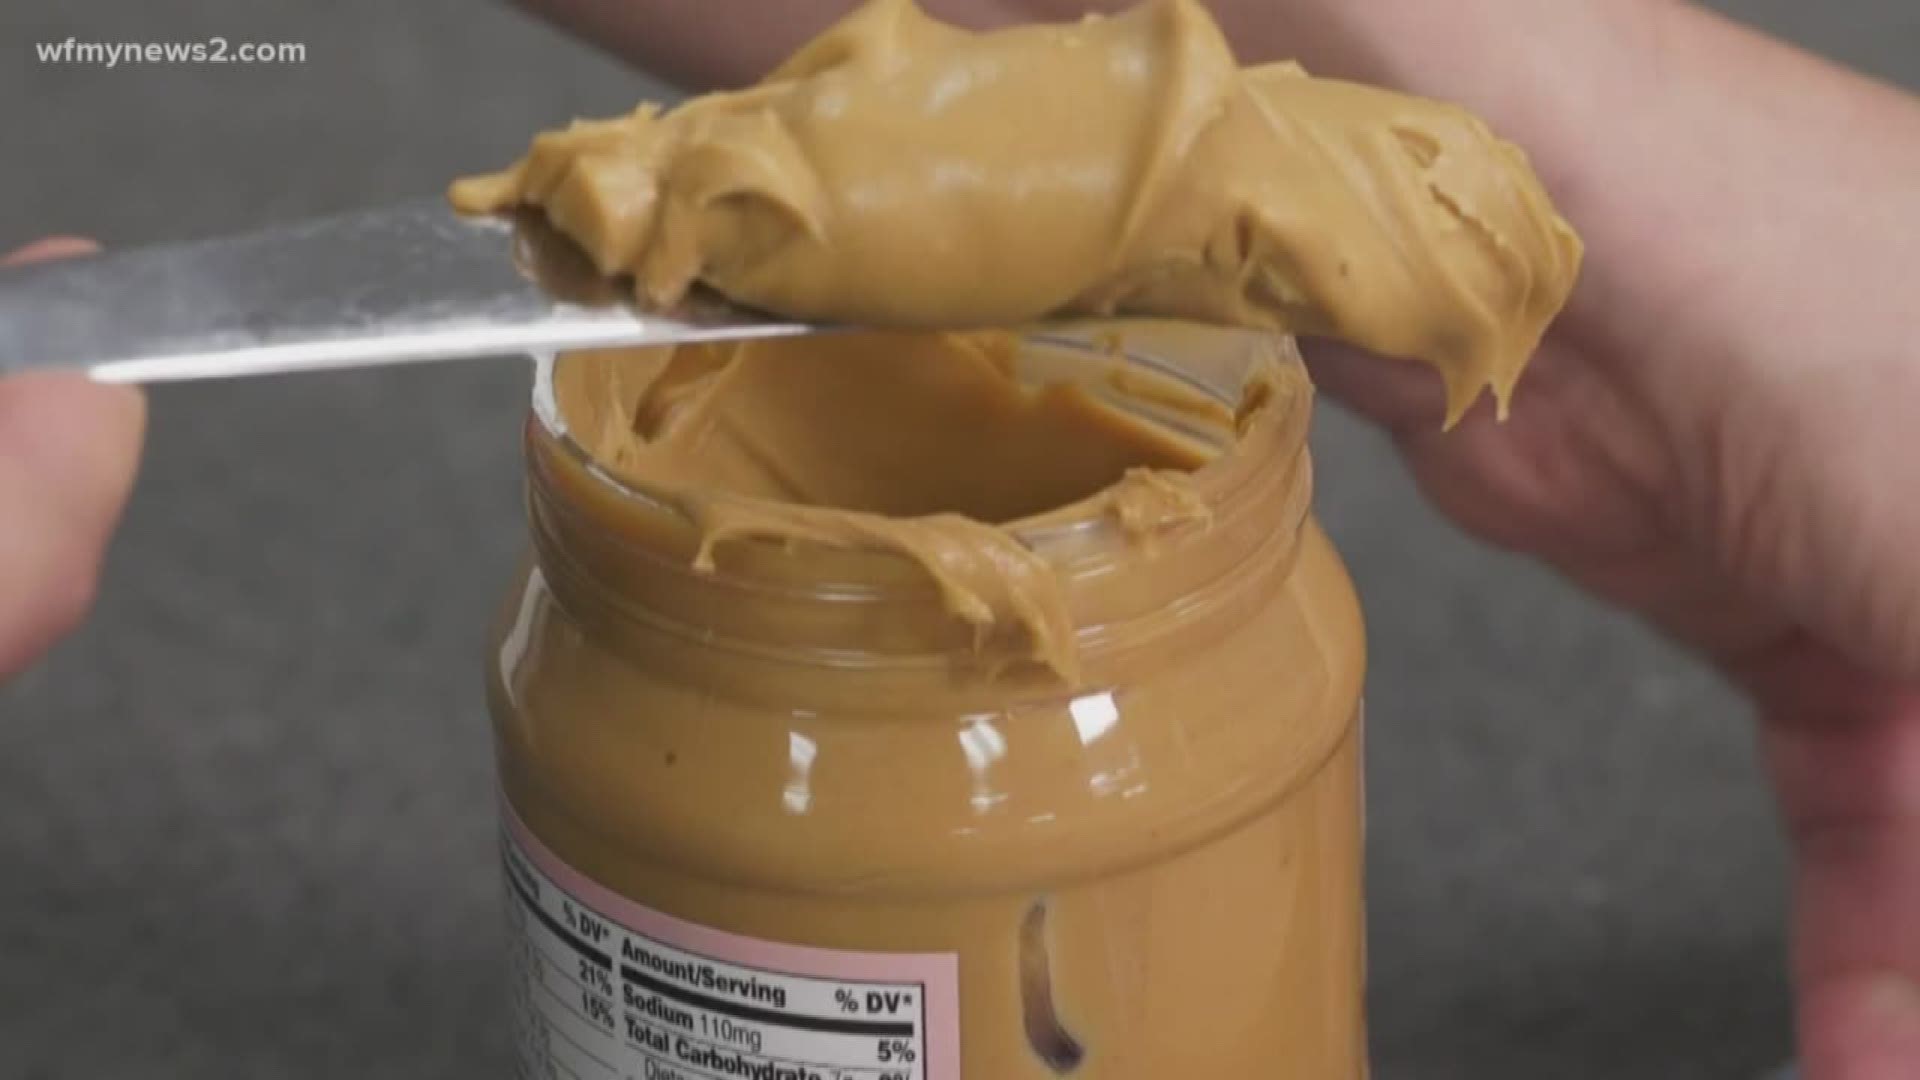 You might think peanut butter has too much fat in it. Not true.